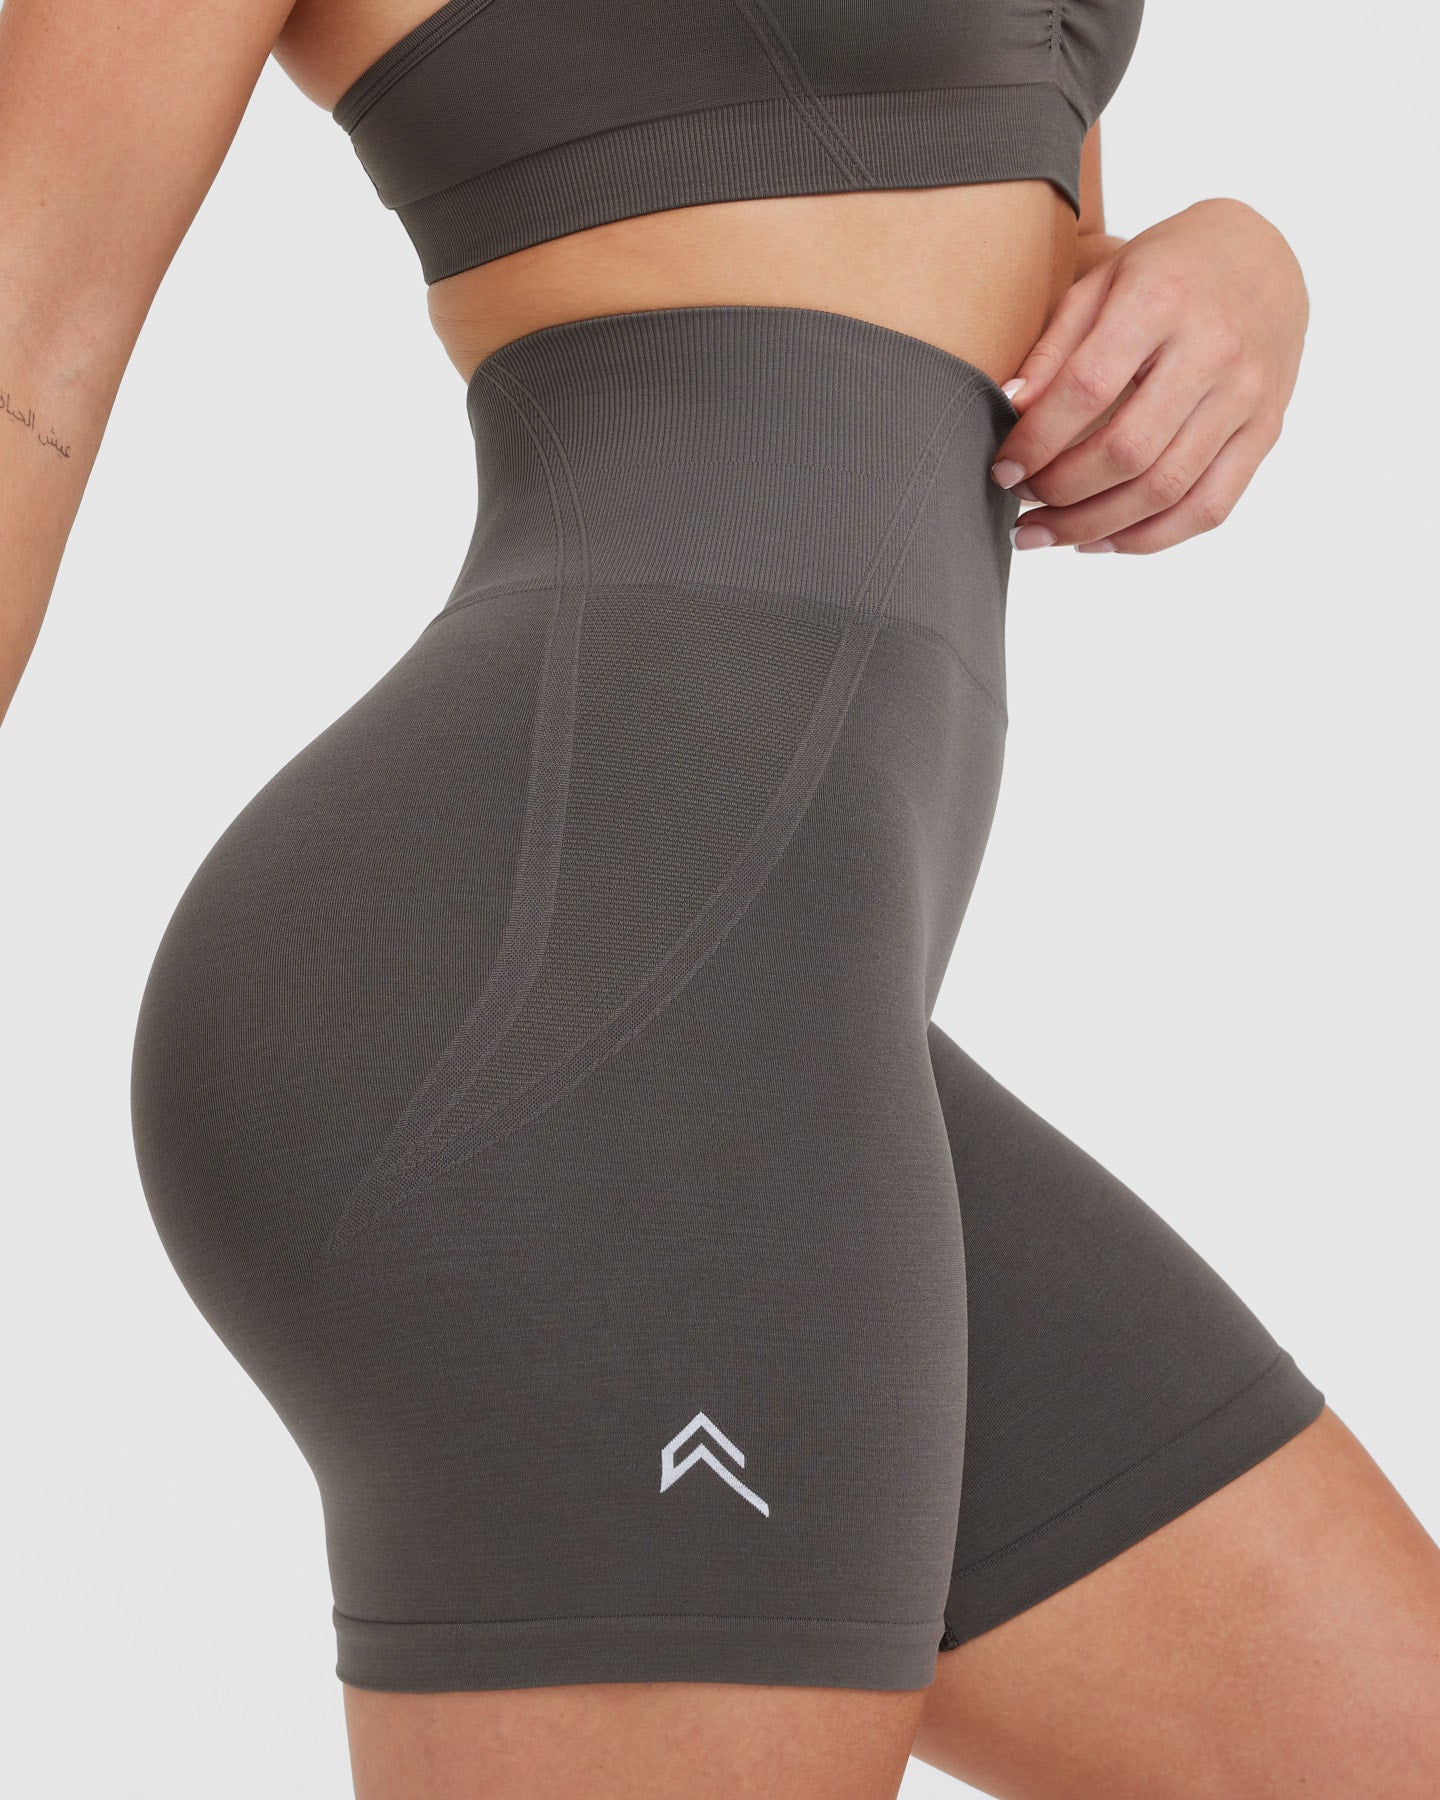 DEEP | TAUPE SHORTS US SKIN - Active WOMEN Oner SECOND